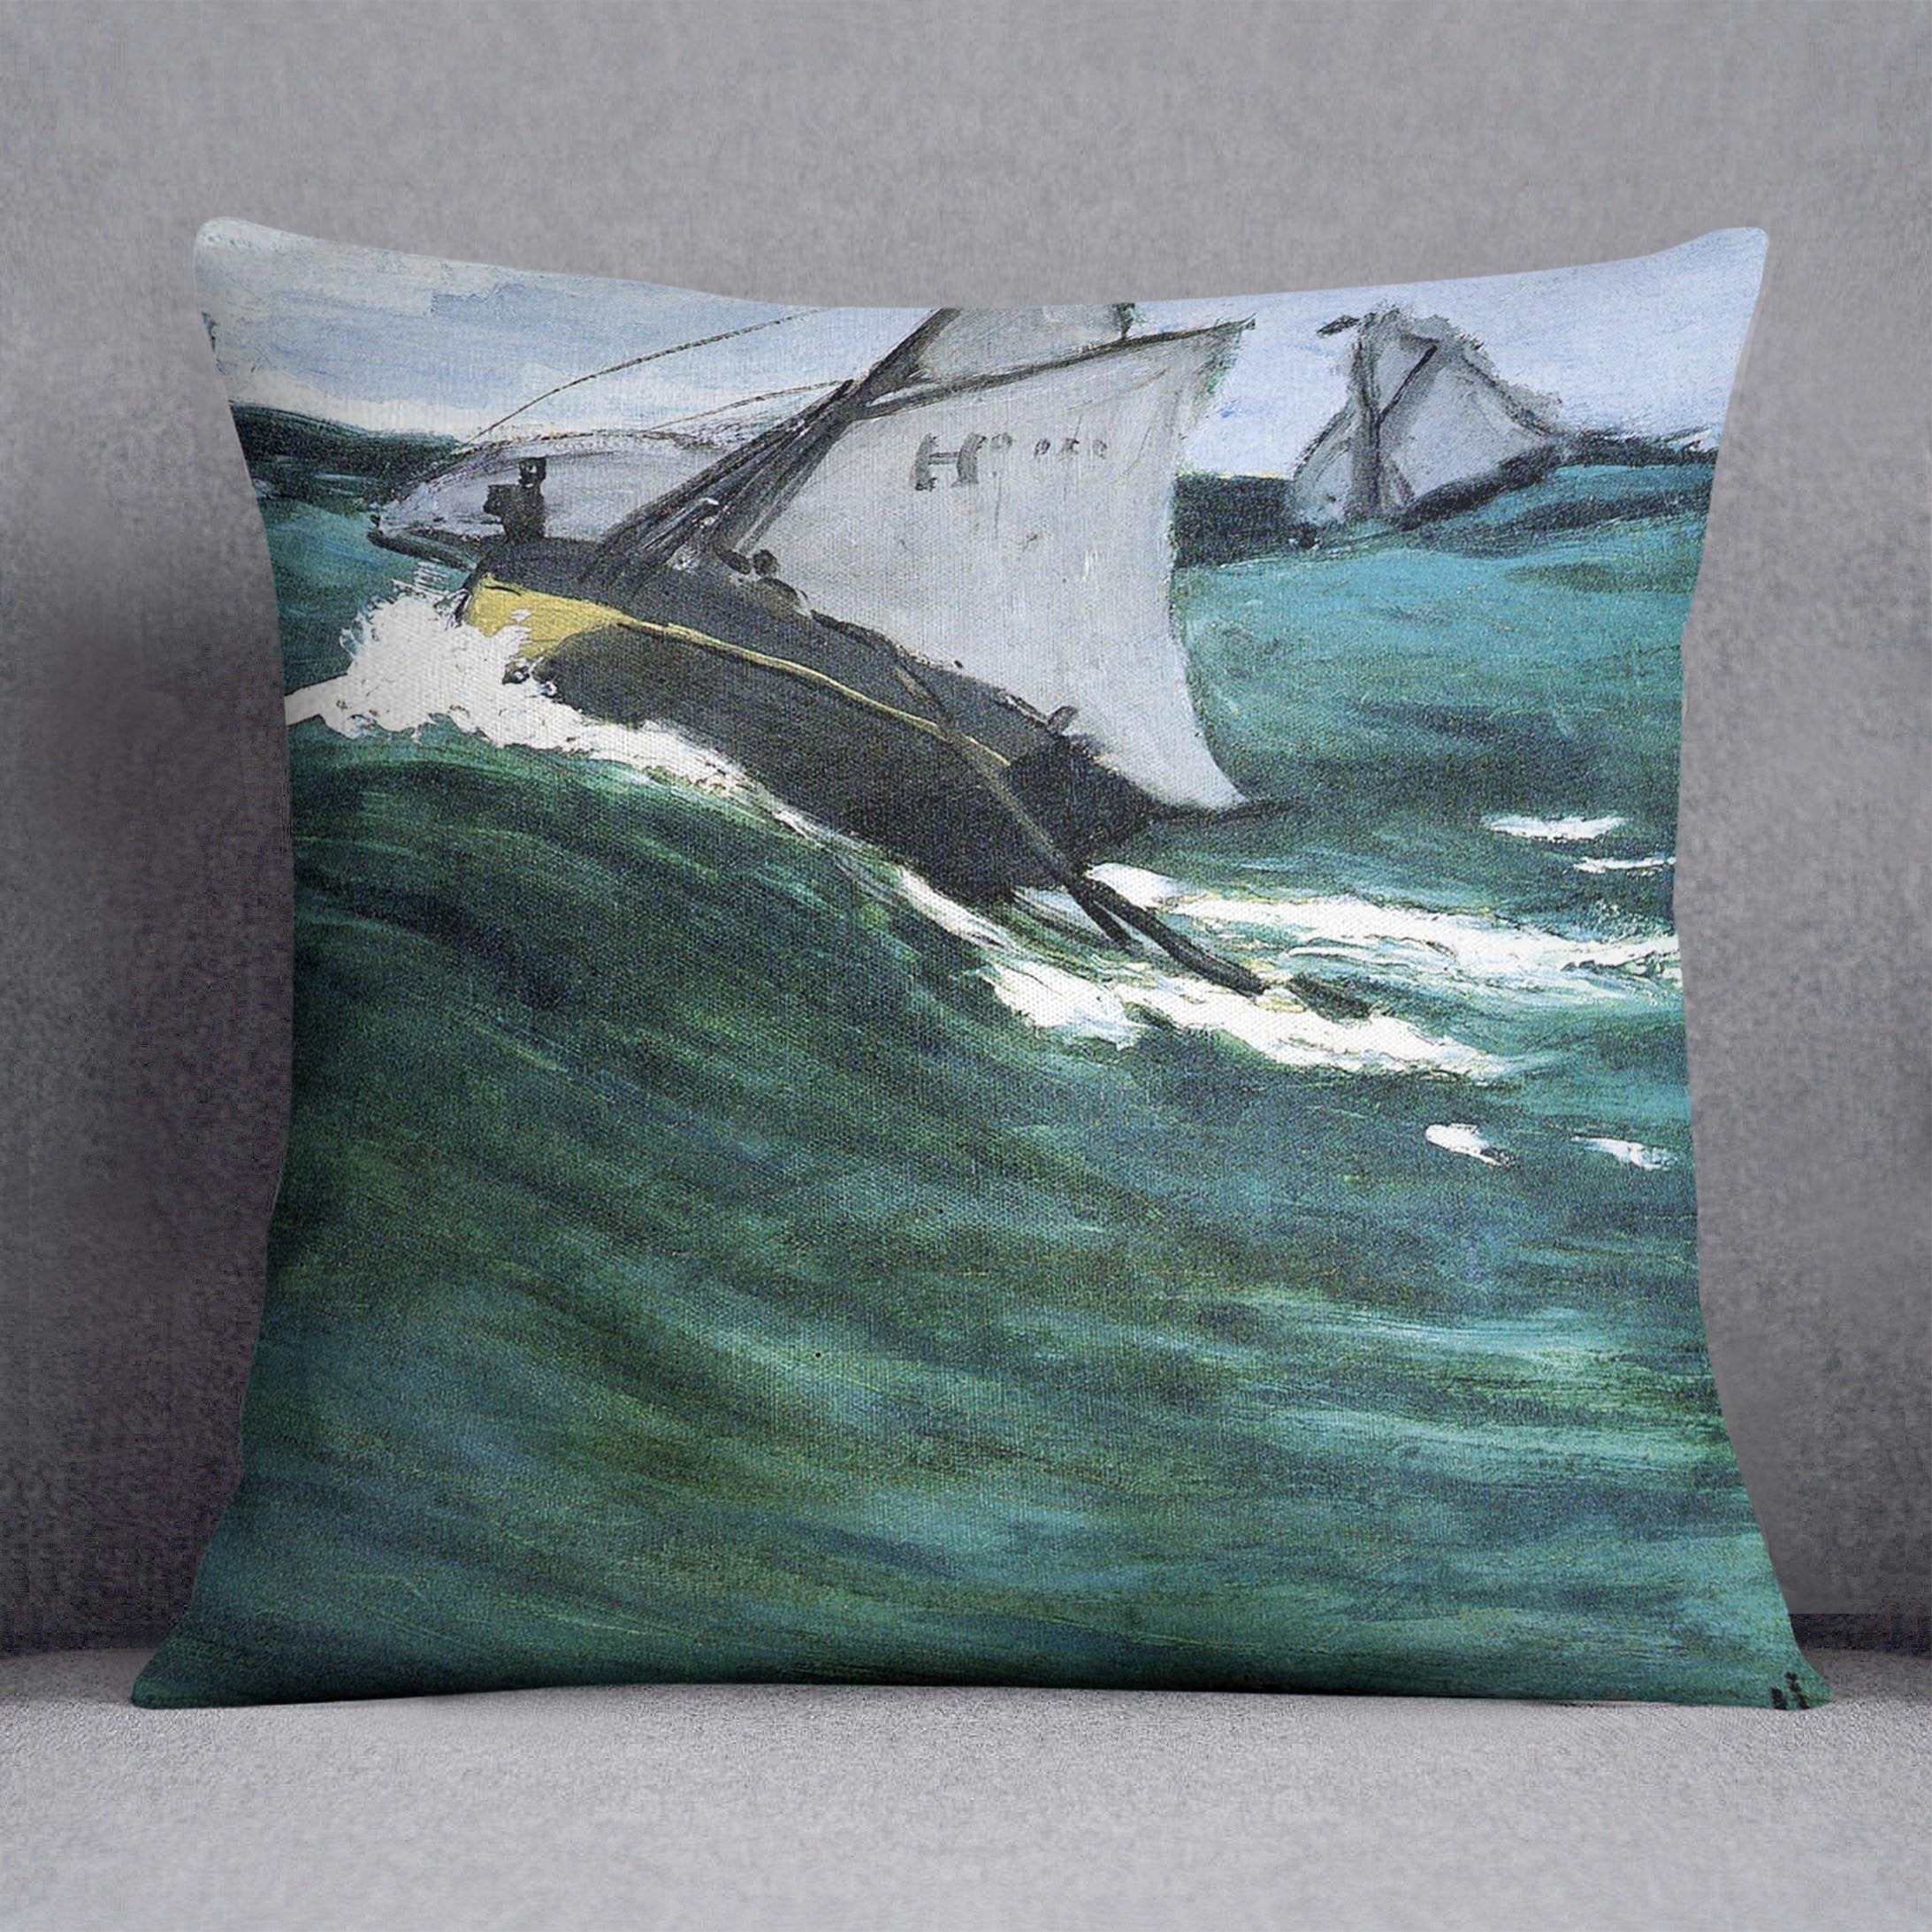 The green wave by Monet Throw Pillow